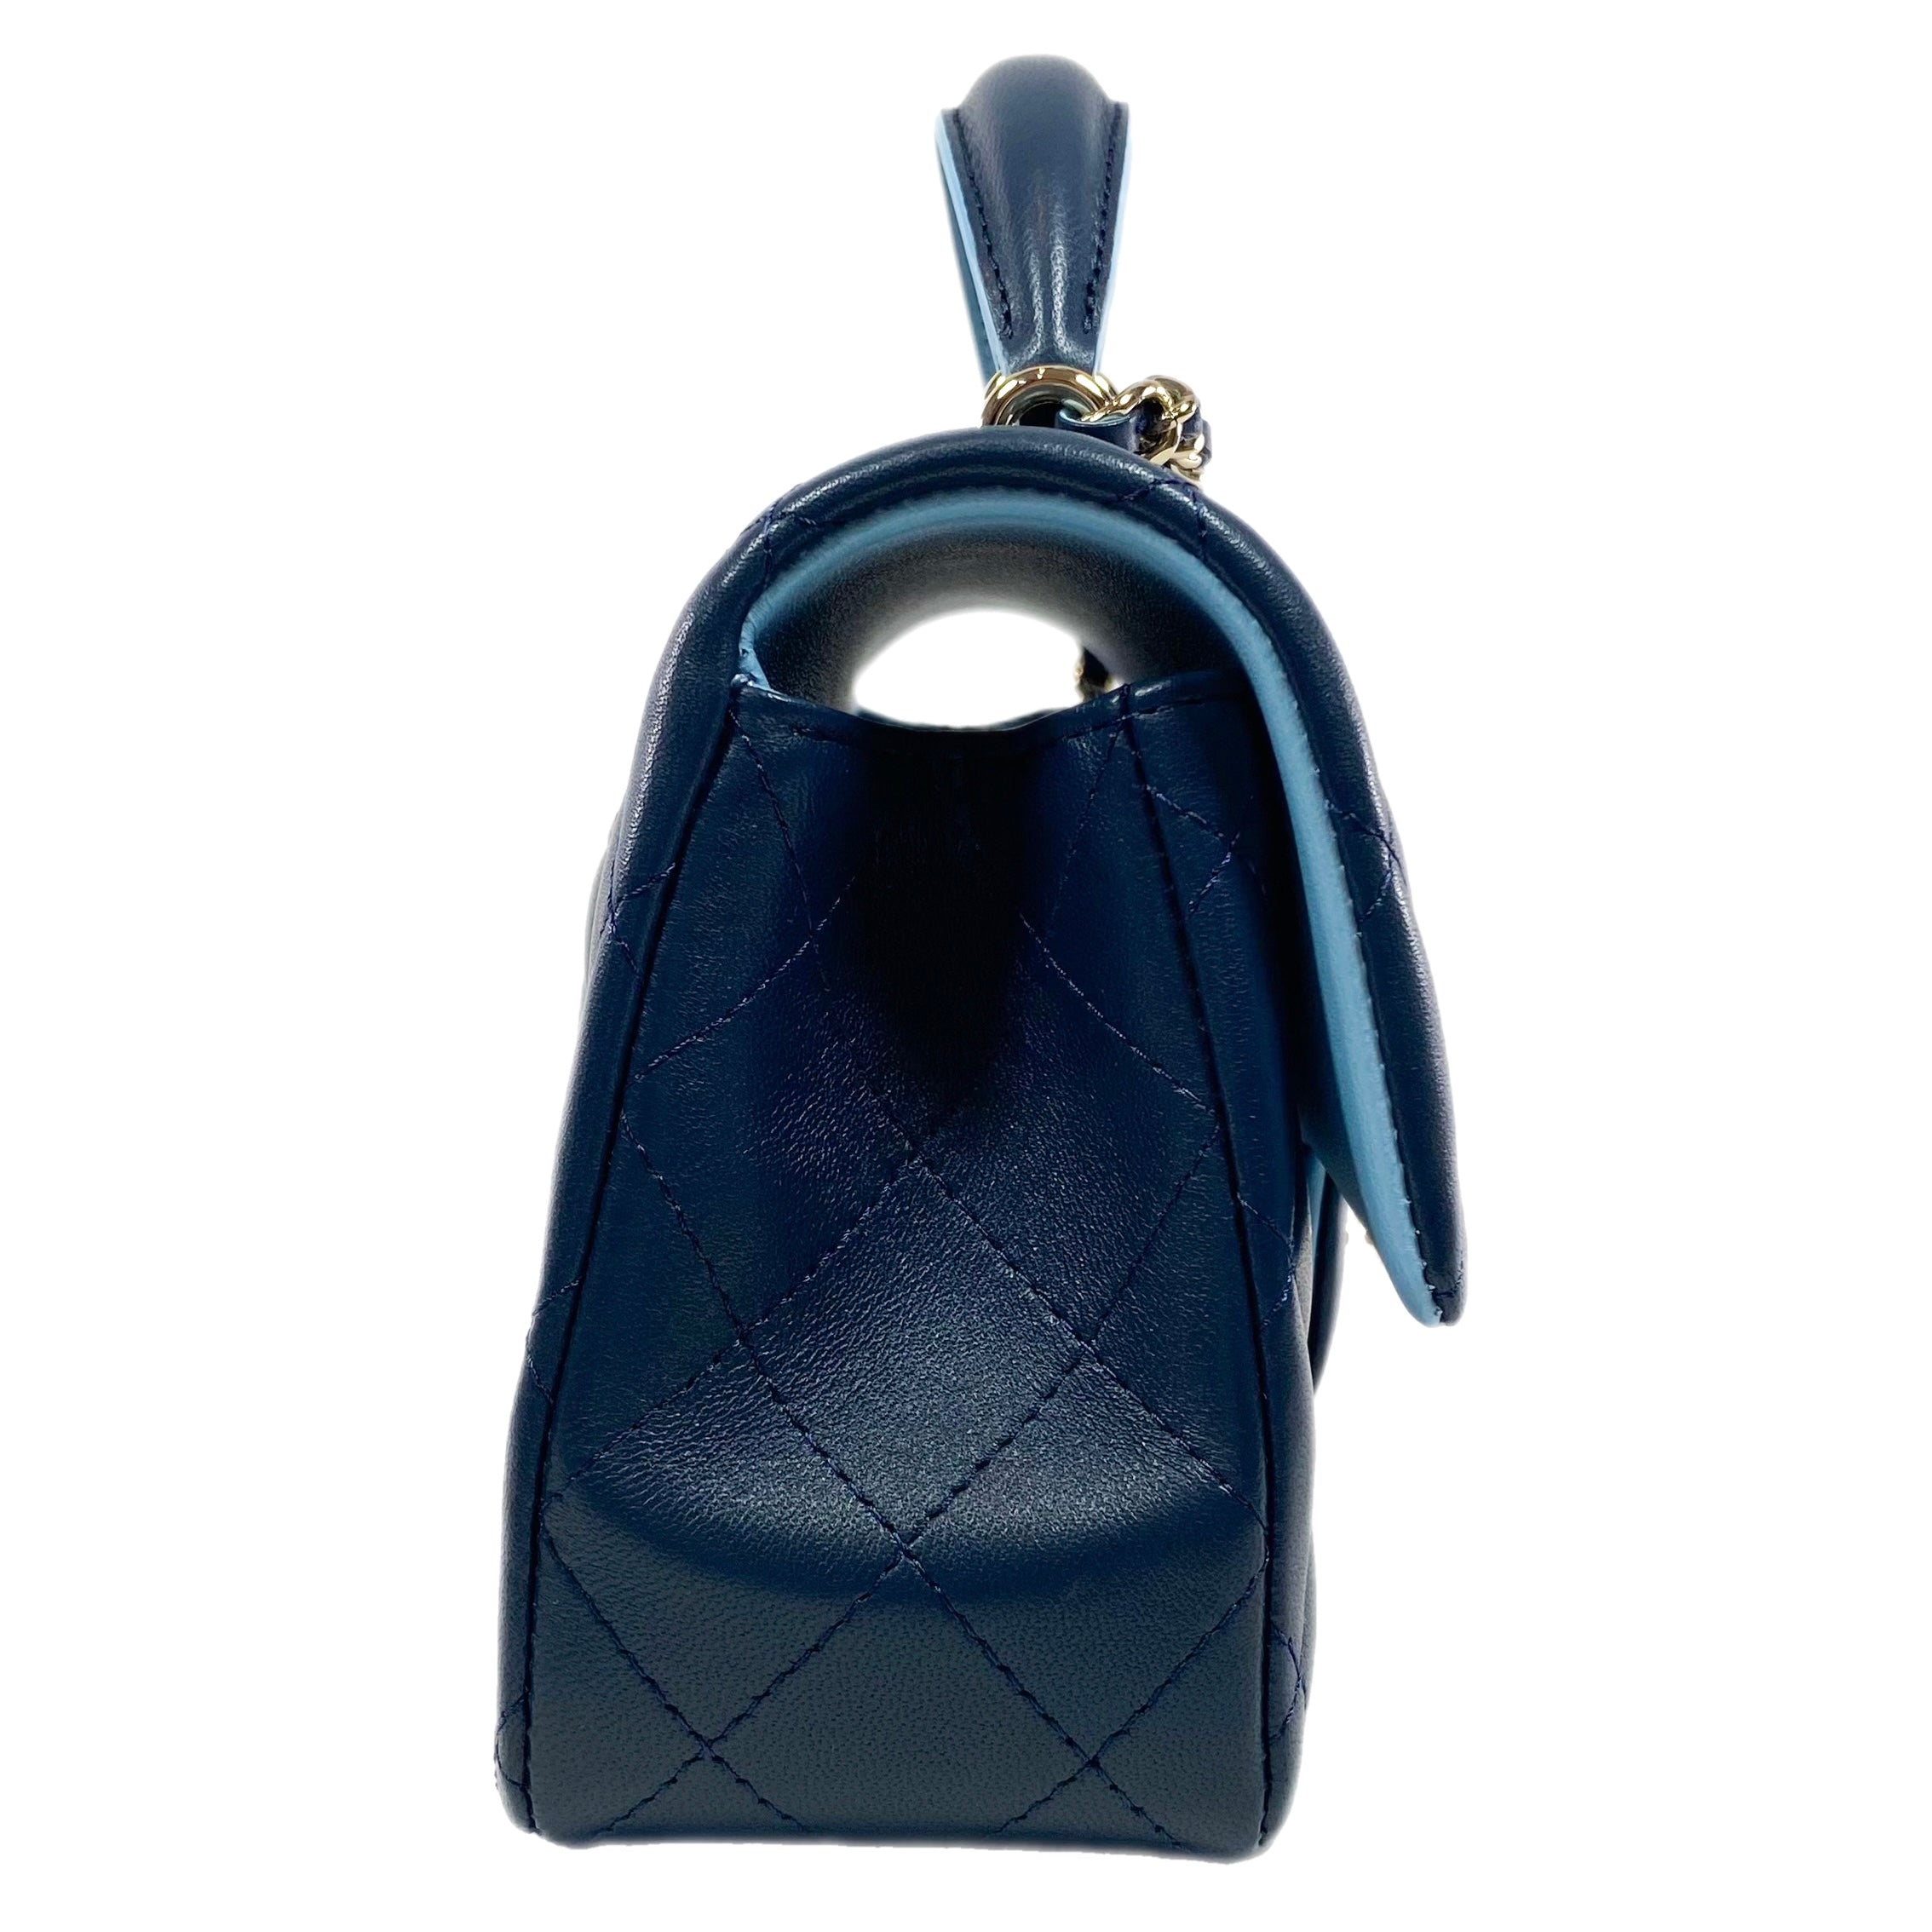 Chanel Quilted Lambskin Bi-Color Navy and Light Blue Mini Top